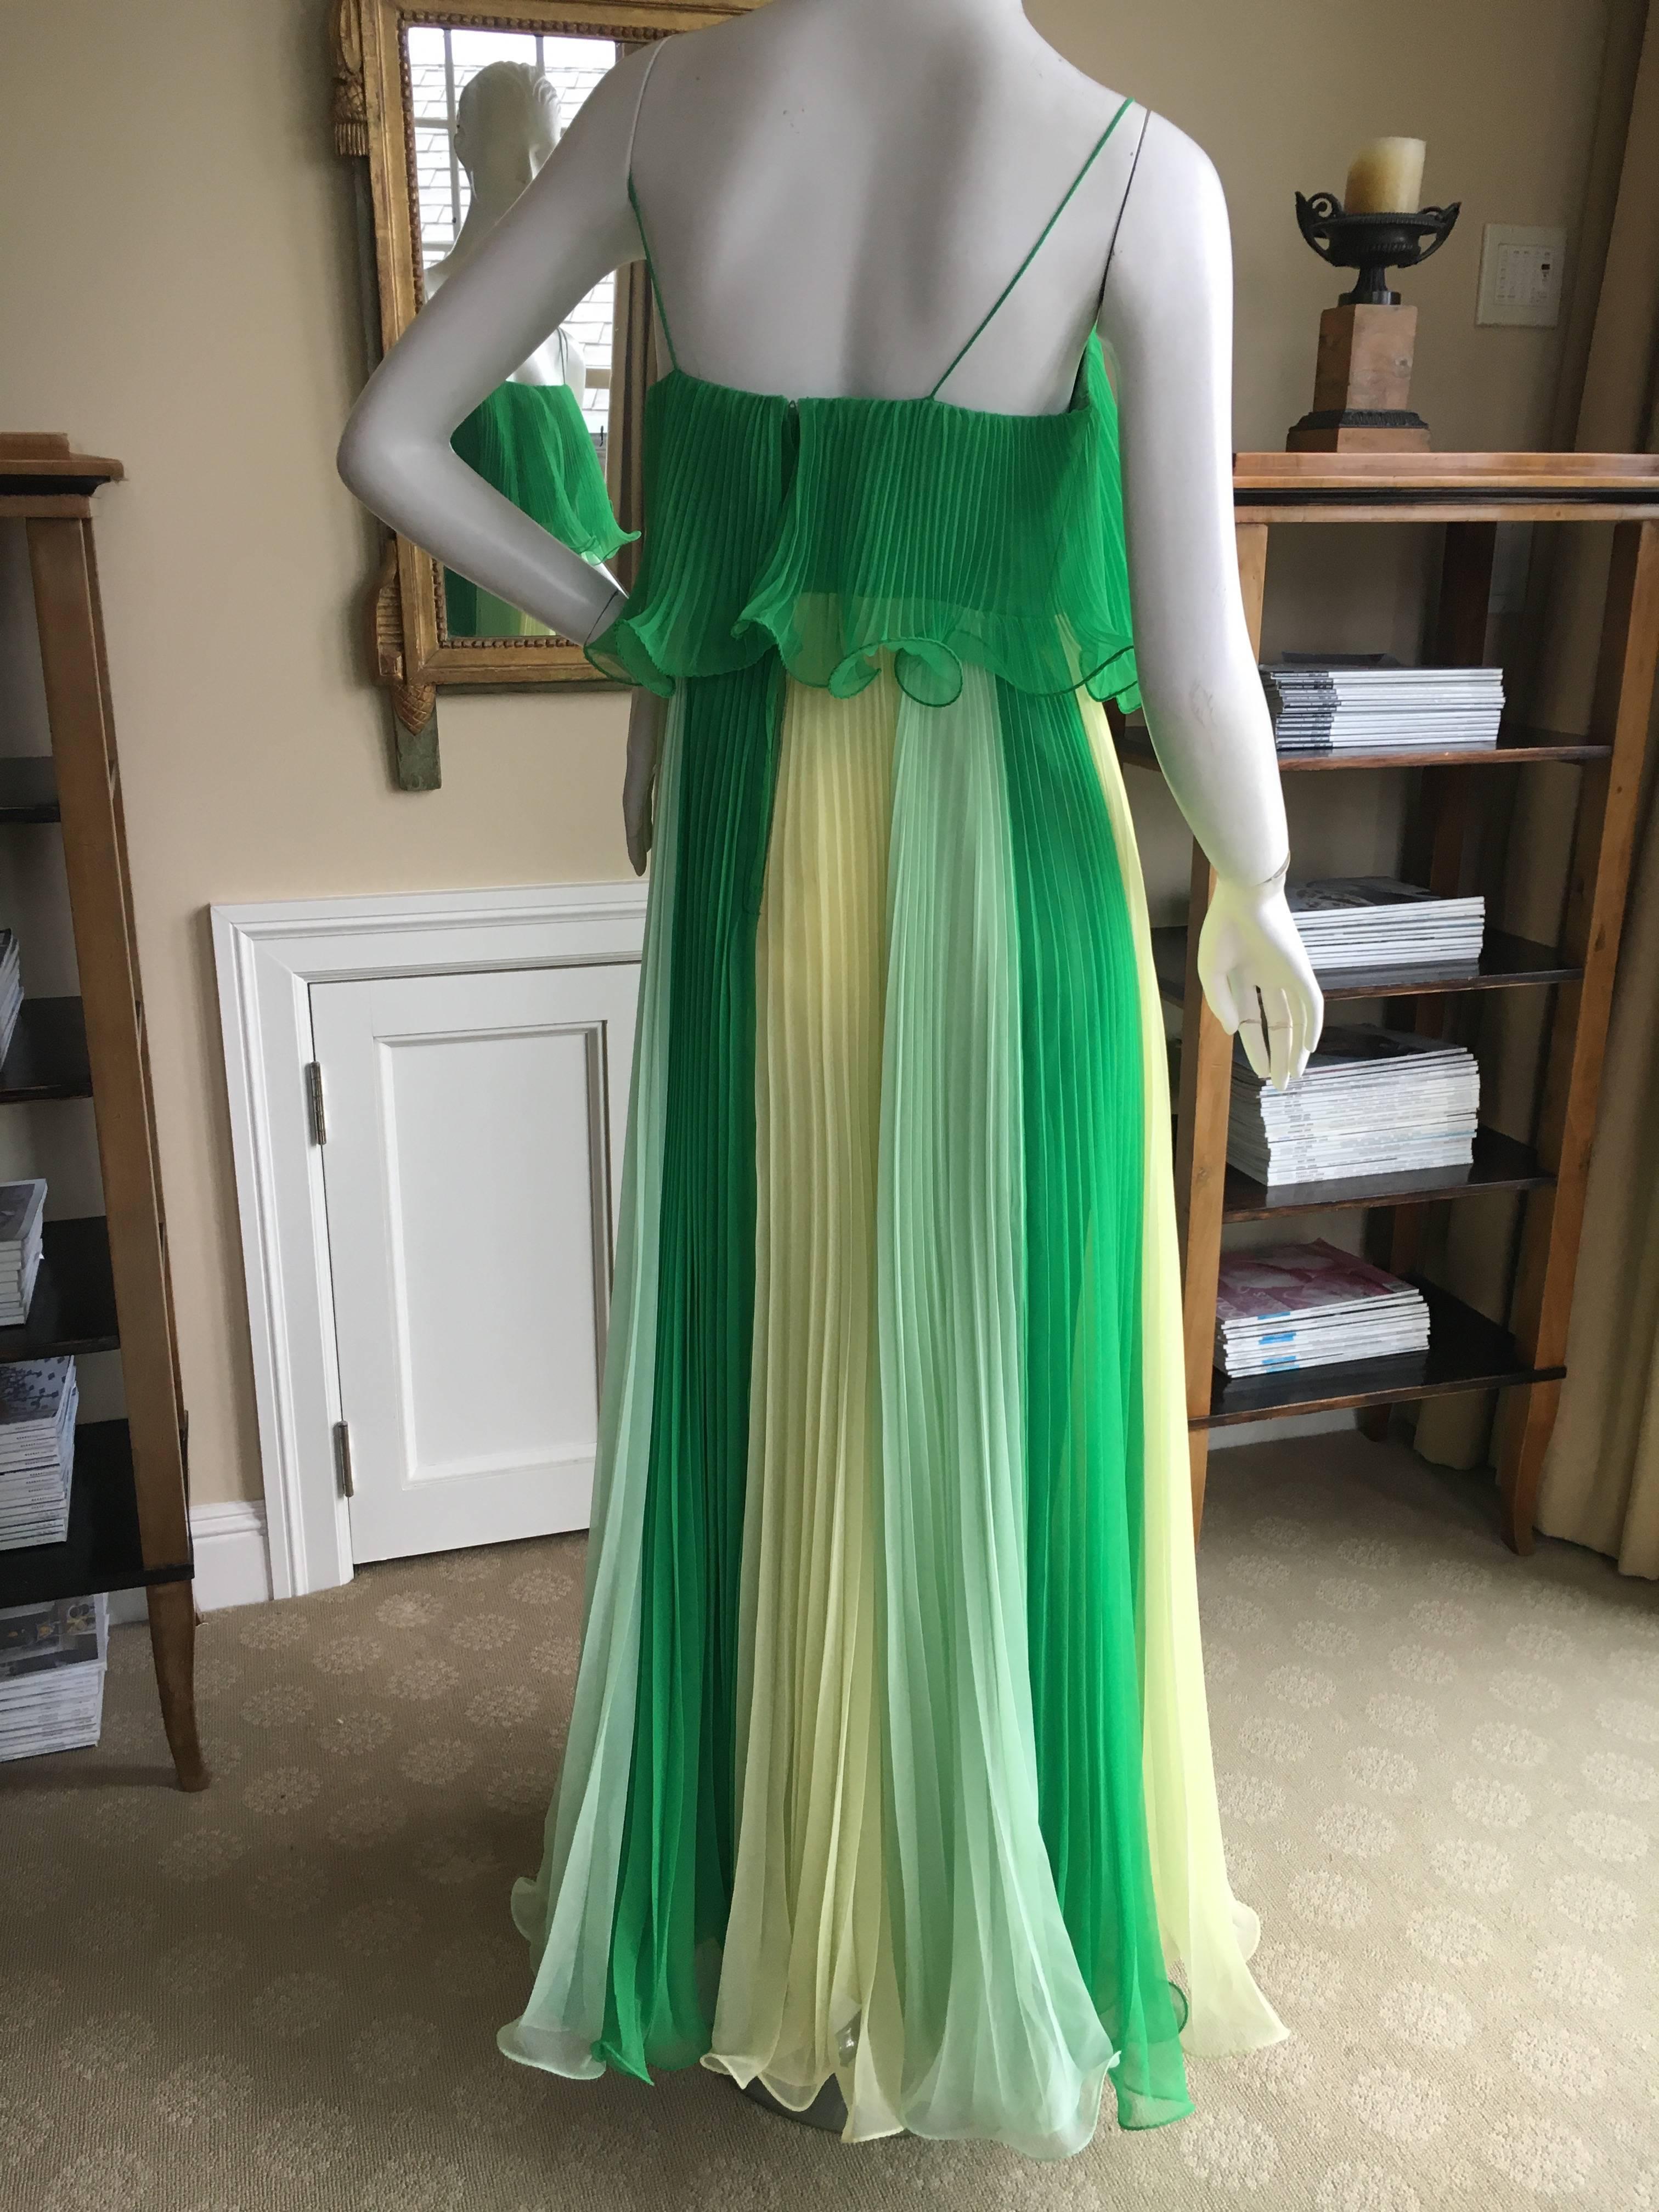 Miss Elliette California 1960's Sheer Pleated Dress with Bell Sleeve Coat In Excellent Condition For Sale In Cloverdale, CA